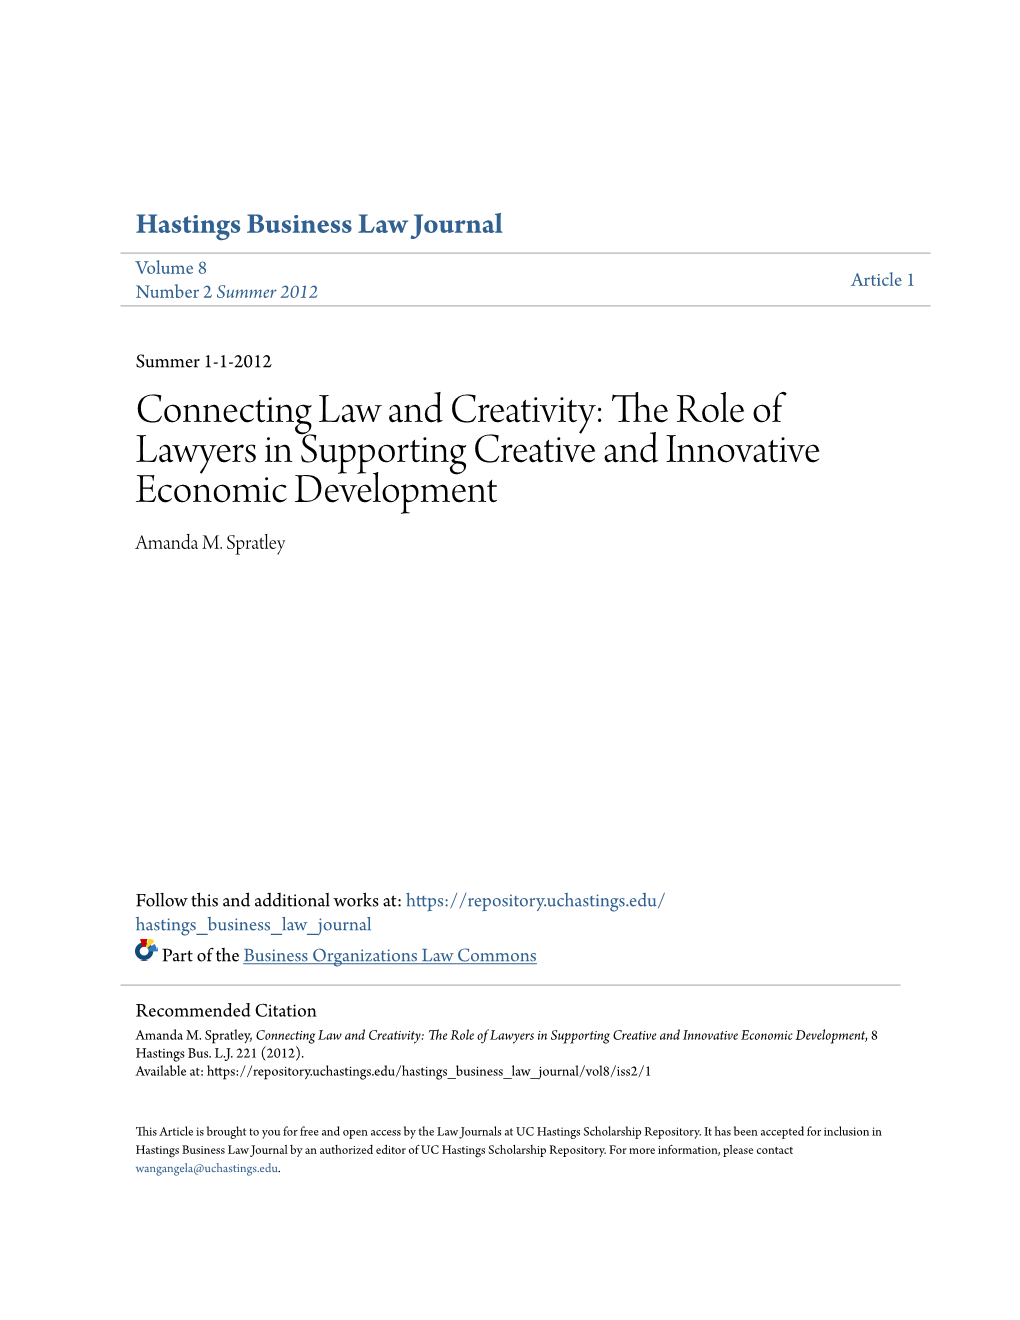 Connecting Law and Creativity: the Role of Lawyers in Supporting Creative and Innovative Economic Development Amanda M